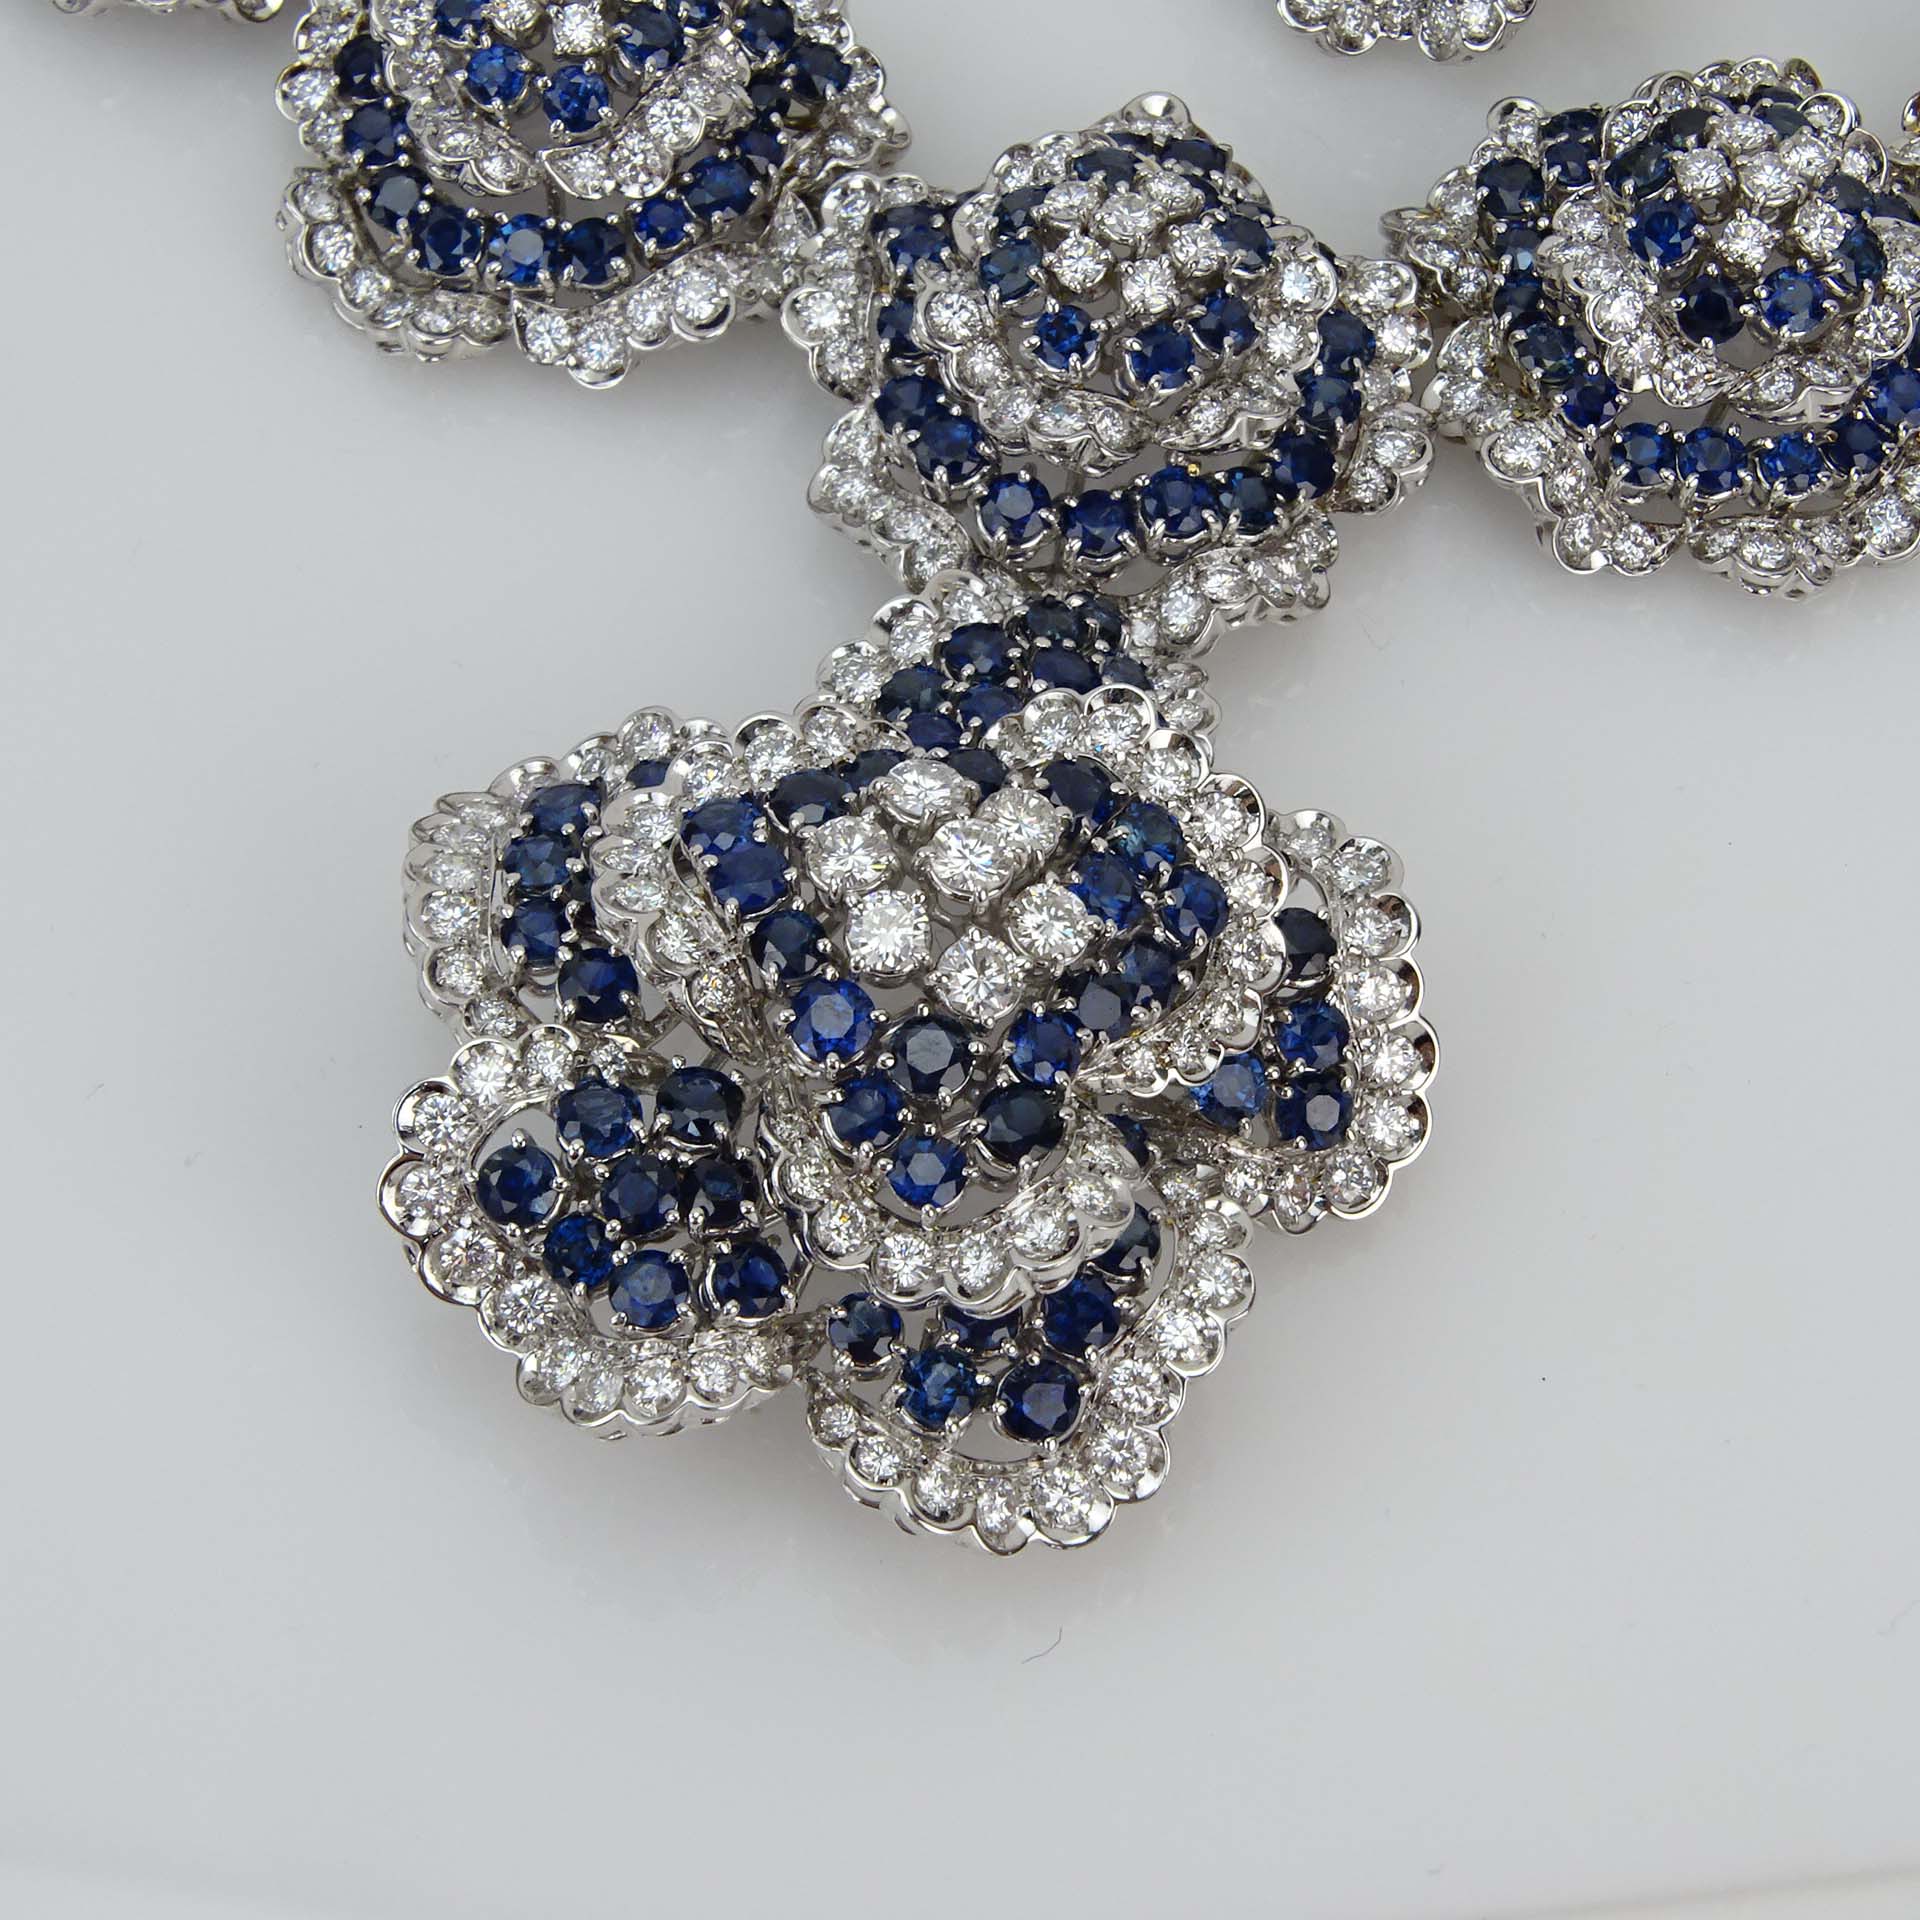 Very Fine Quality Approx. 60.0 Carat Round Brilliant Cut Diamond, 60.0 Carat Round Brilliant Cut Sapphire and 18 Karat White Gold Suite Including Necklace, Brooch and Earrings. 